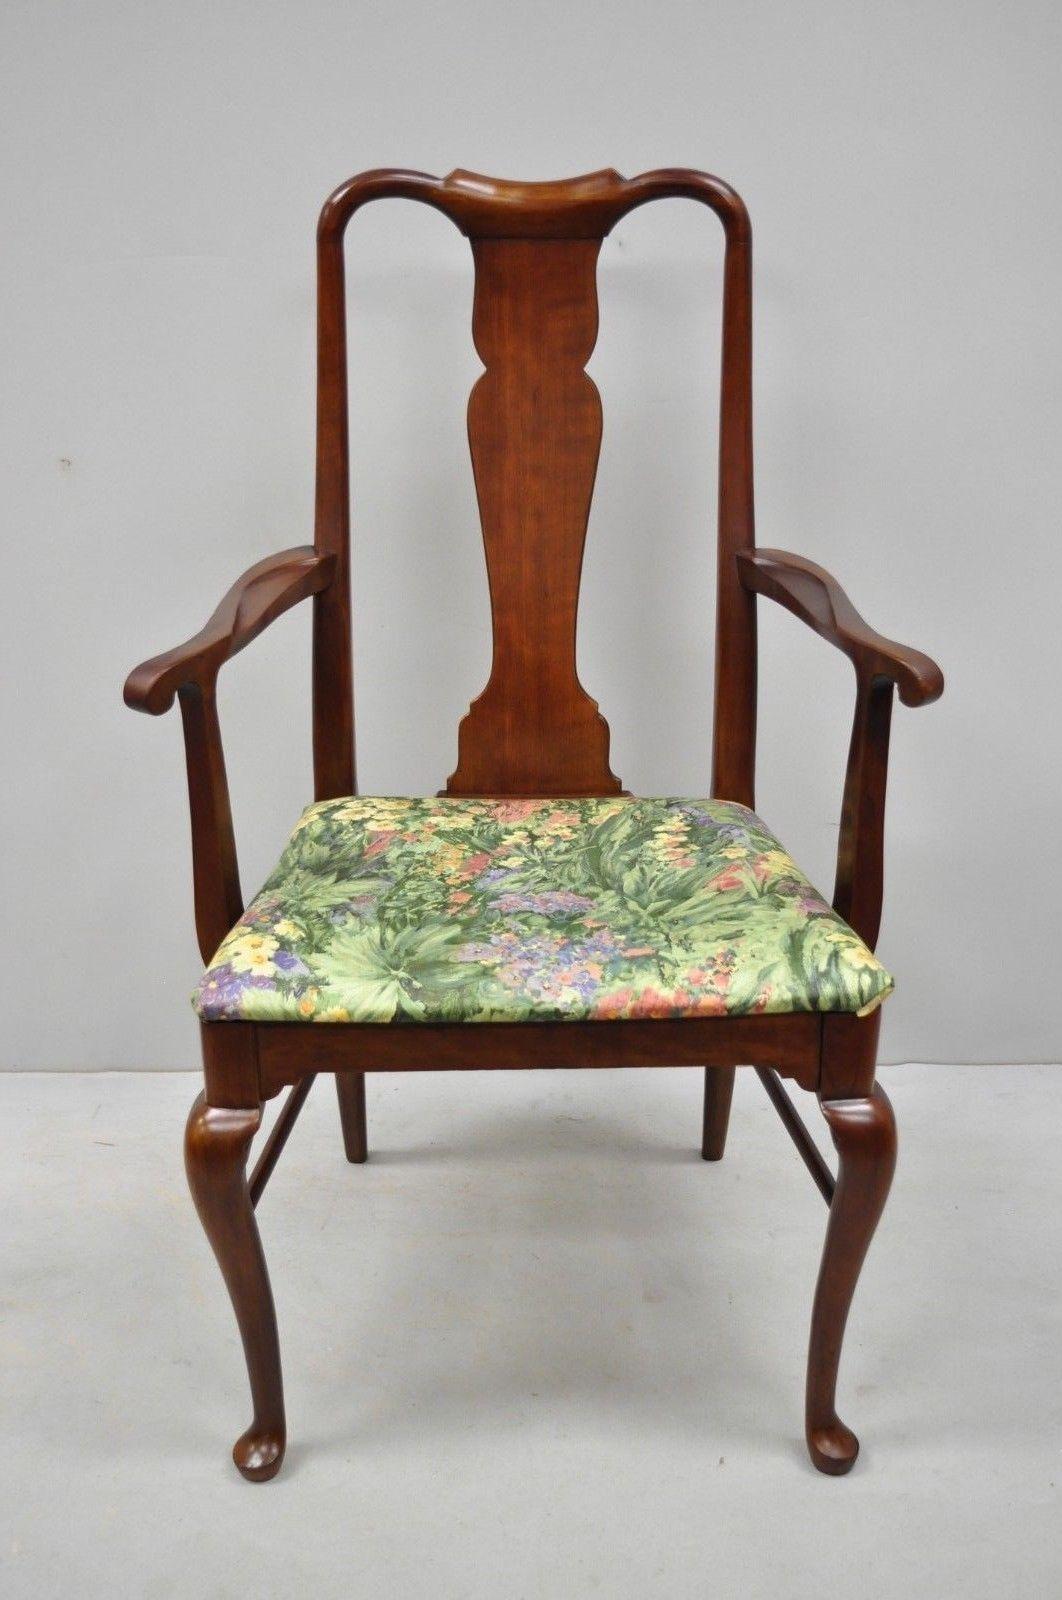 6 vintage Thomasville Queen Anne style solid cherrywood dining chairs. Listing features 4 side chairs, 2 armchairs, slender Queen Anne legs, solid cherry wood construction, beautiful wood grain, original stamp, quality American craftsmanship, circa